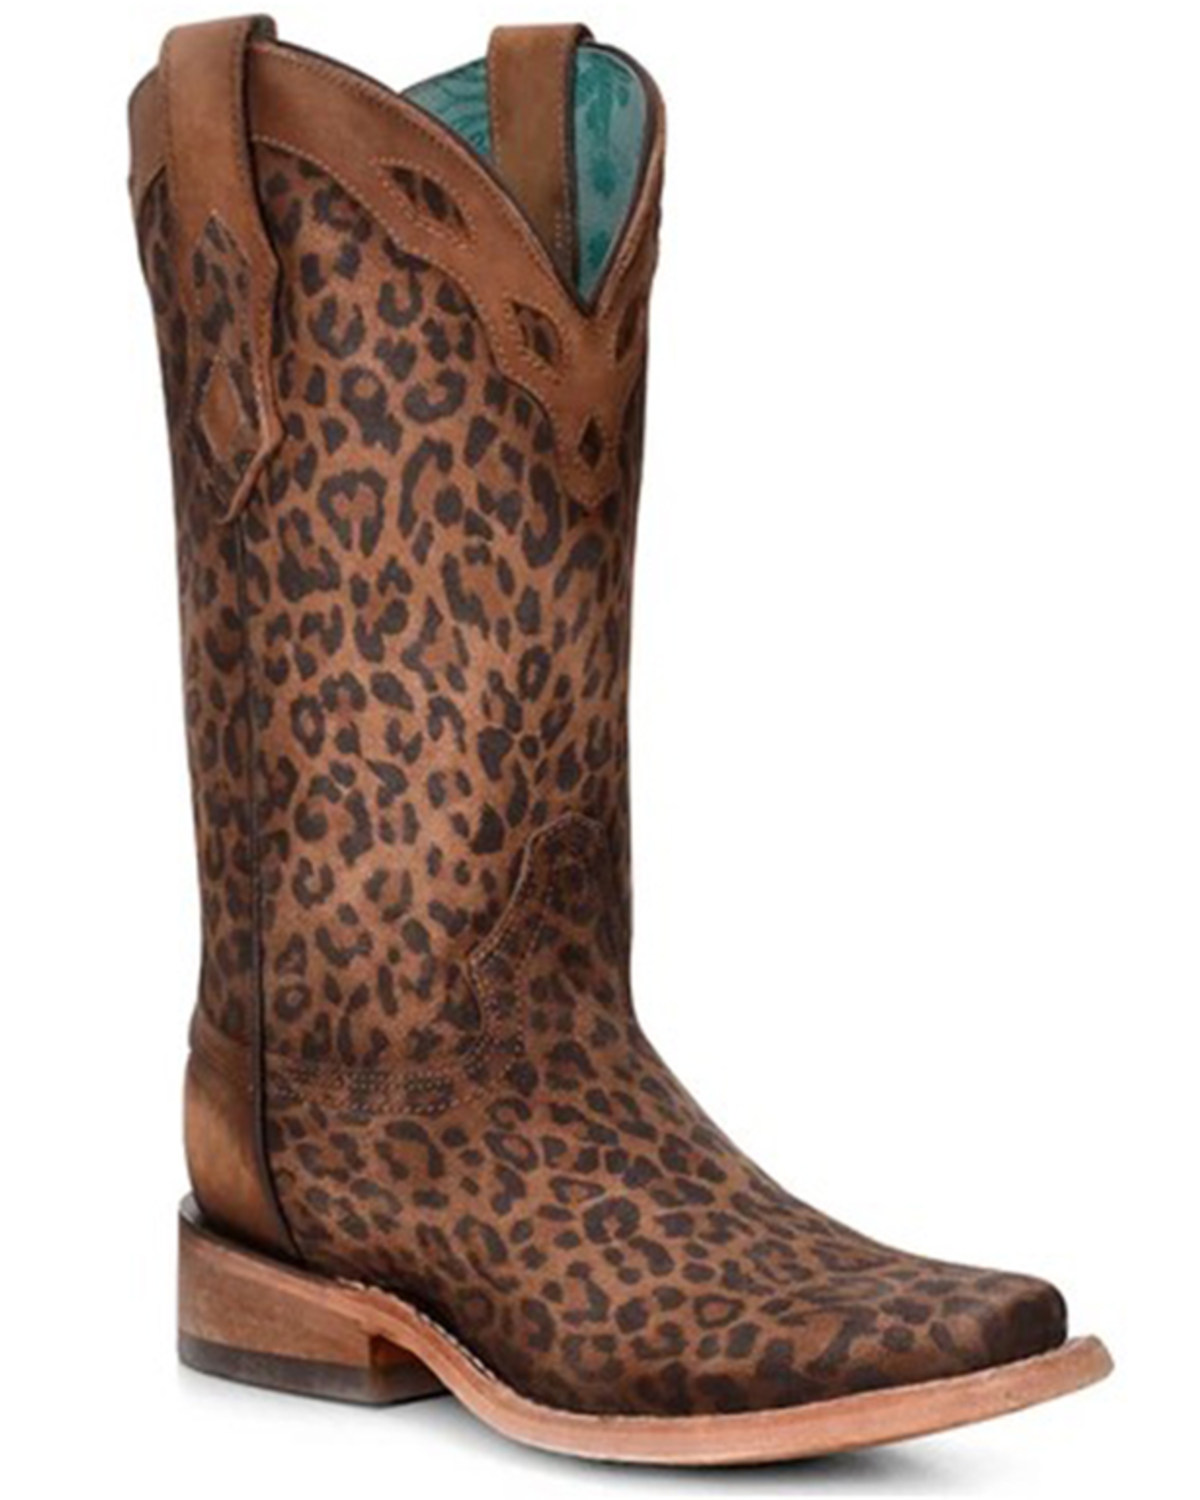 Corral Women's Leopard Print Western Boots - Square Toe